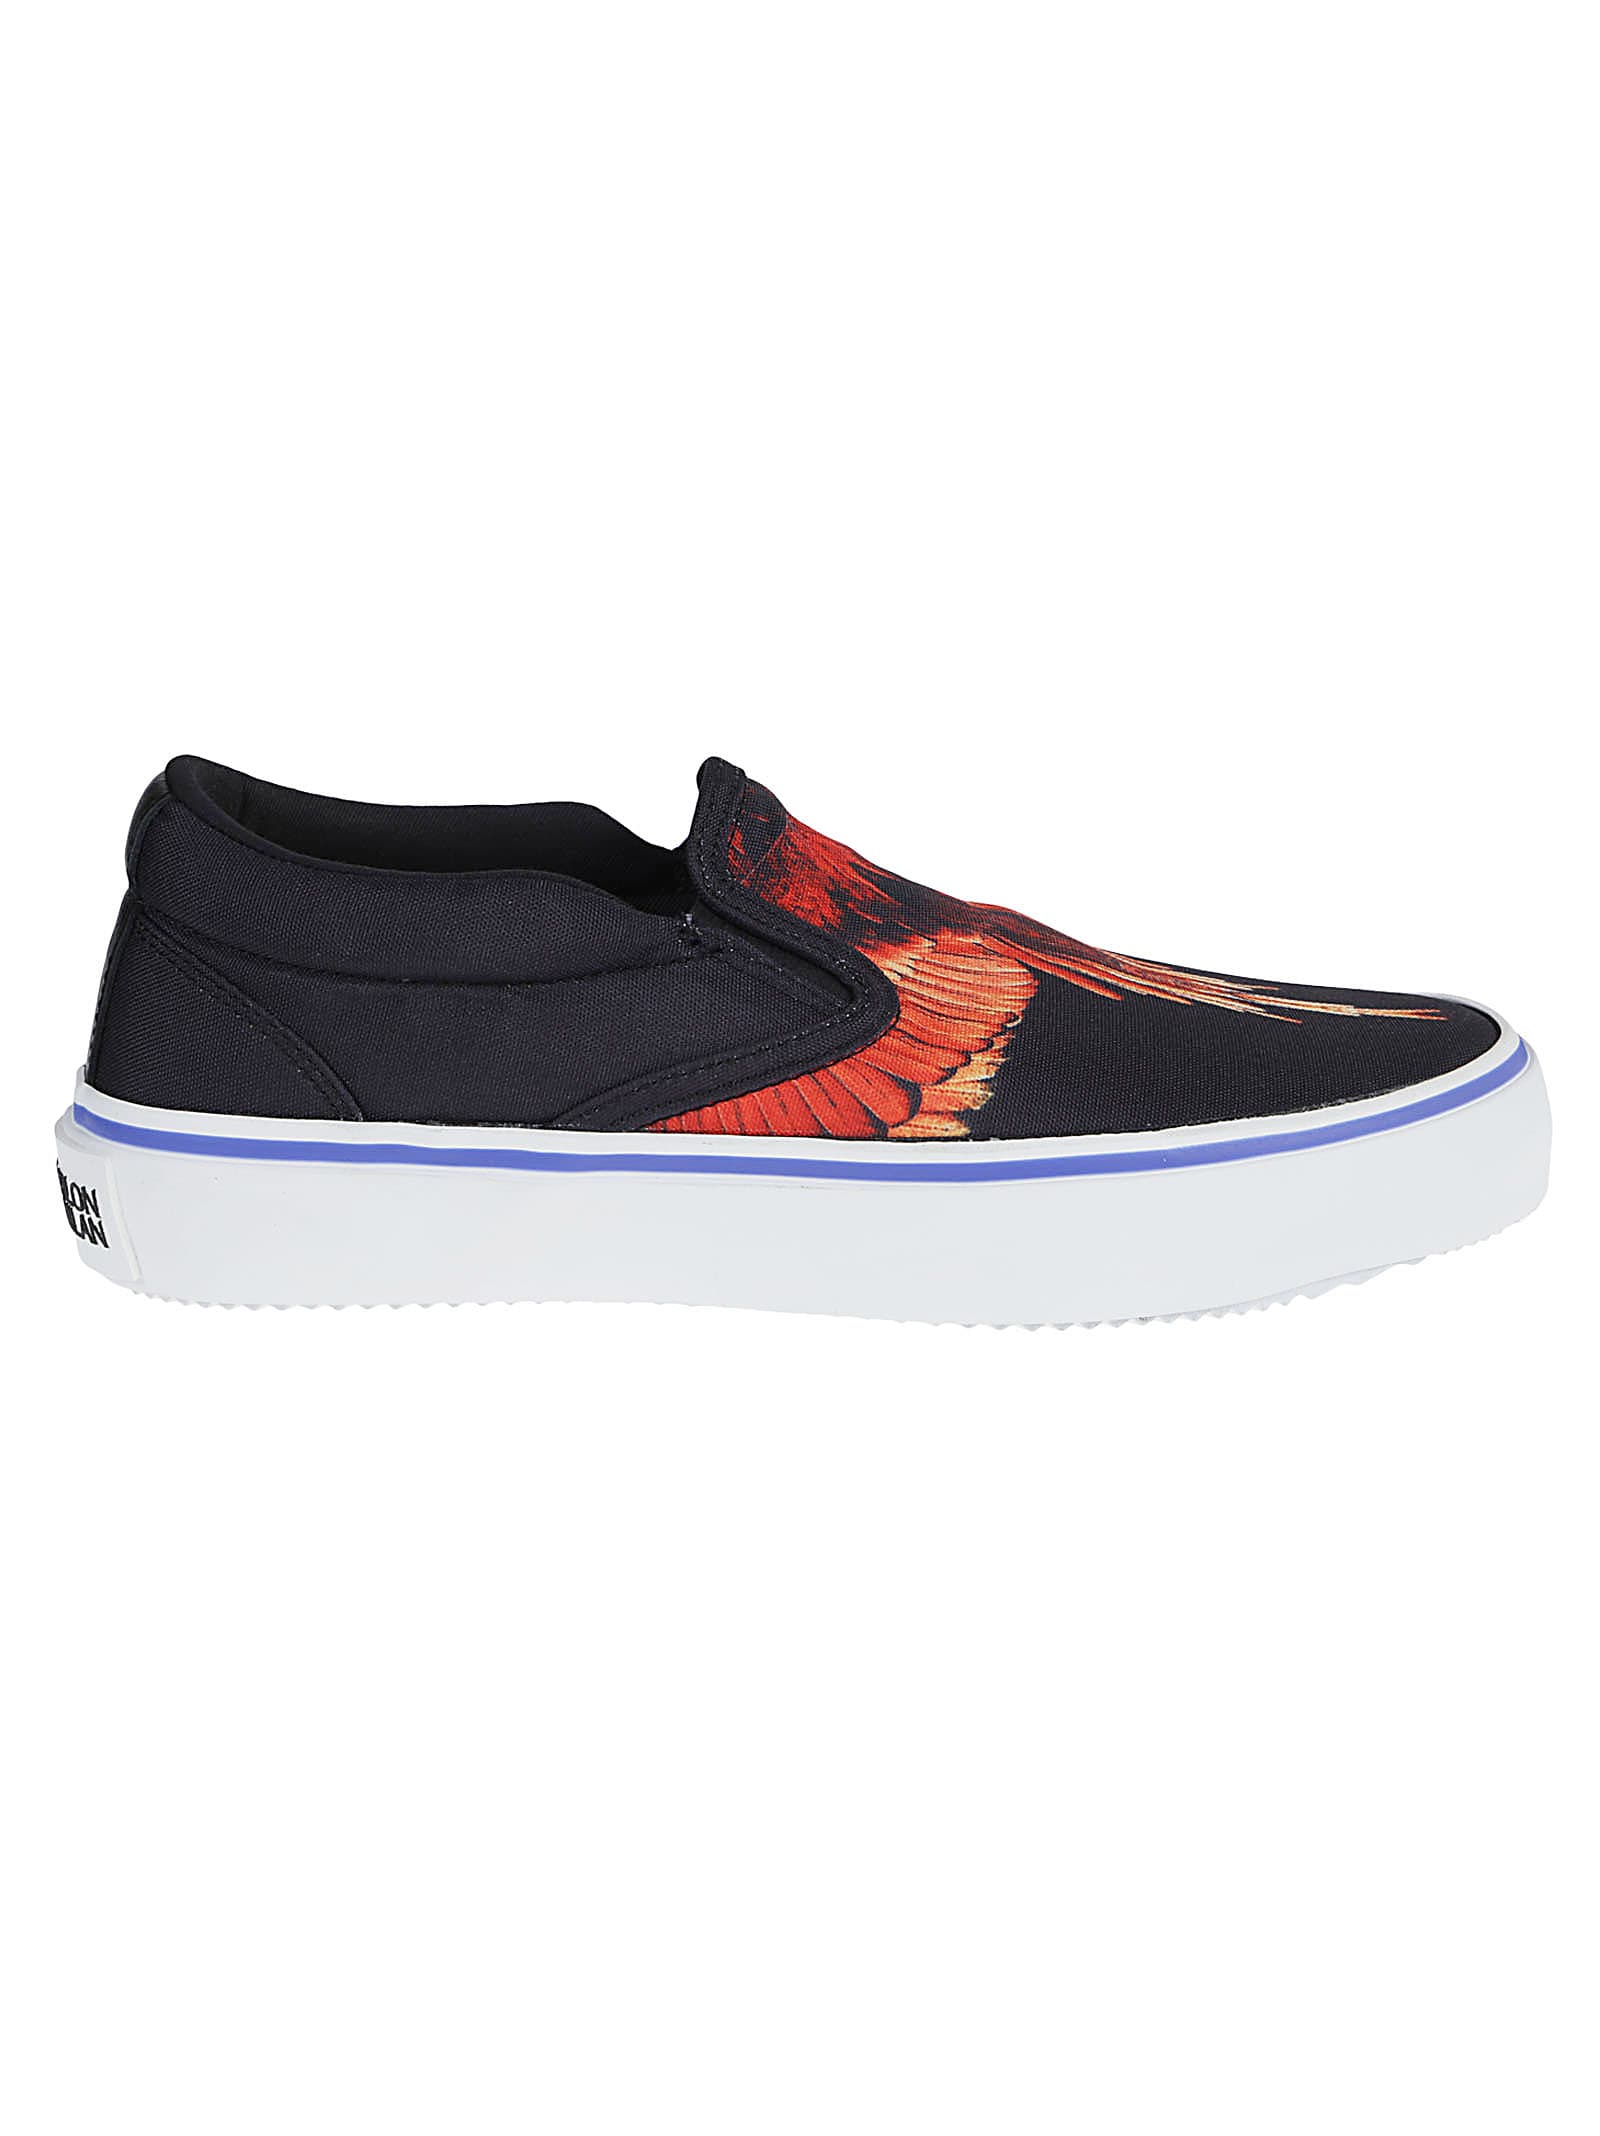 Marcelo Burlon County Of Milan Icon Wings Slipon Trainers In Black Red